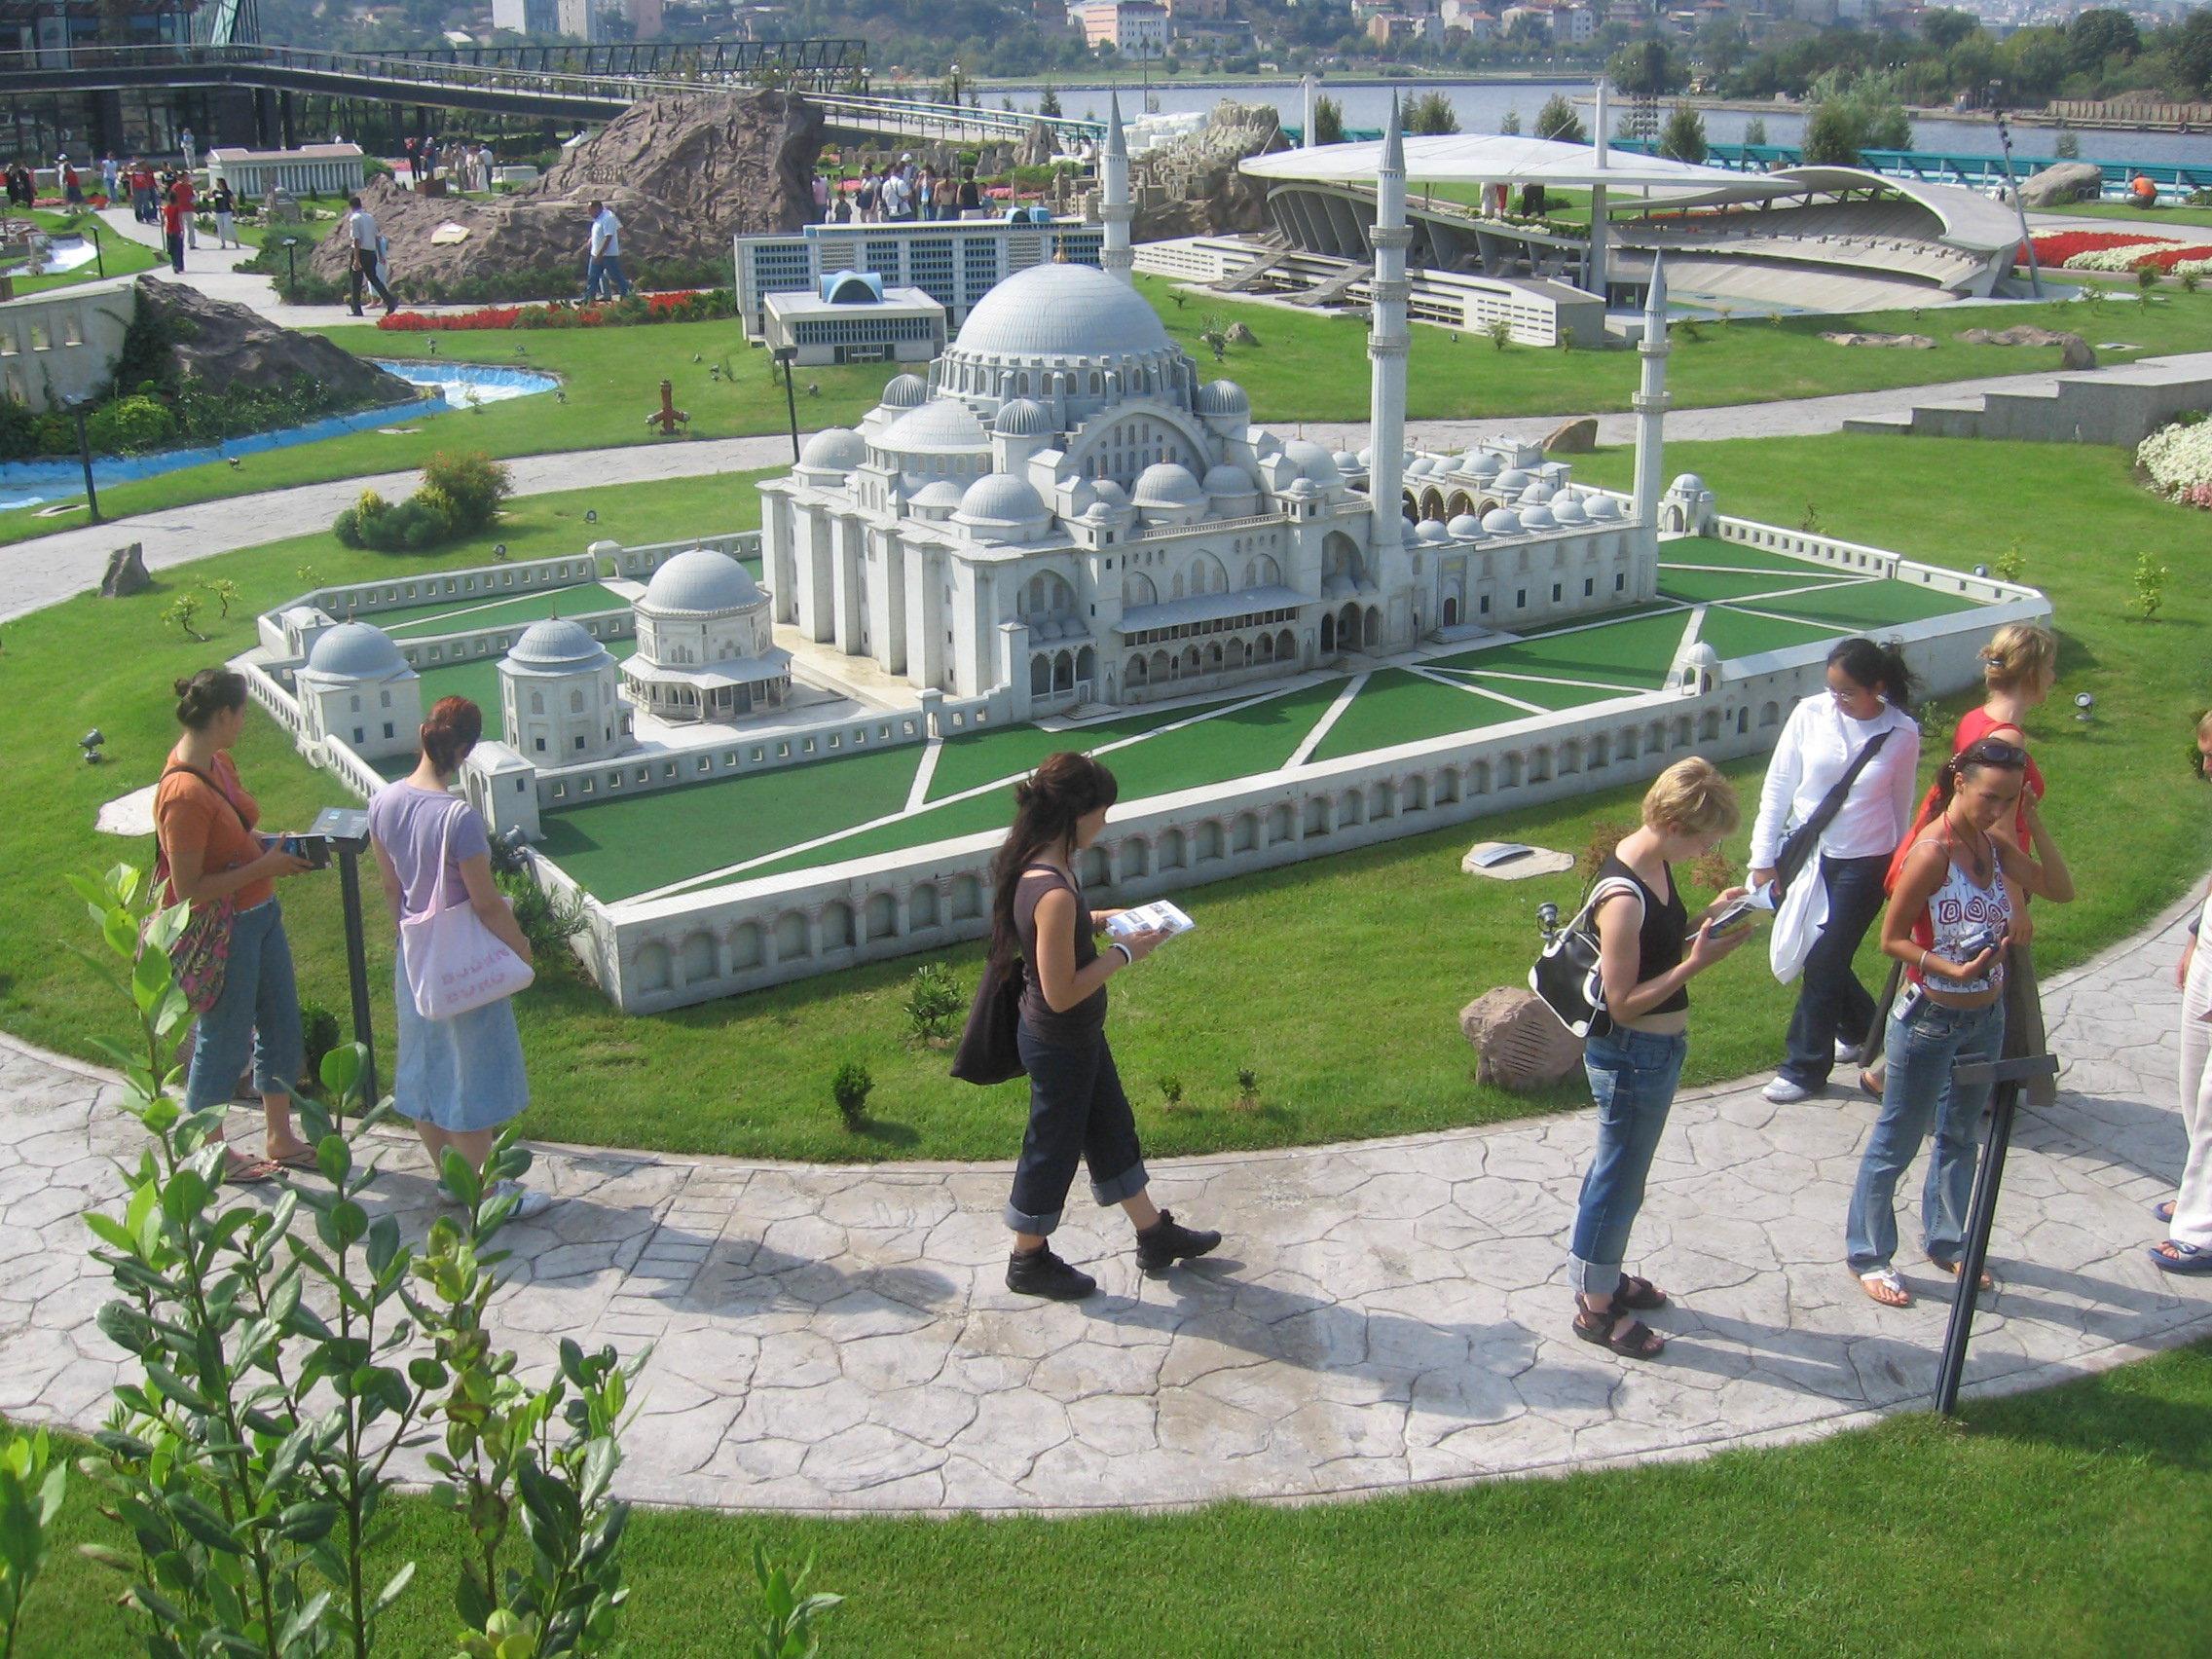 Cover image of this place Miniatürk